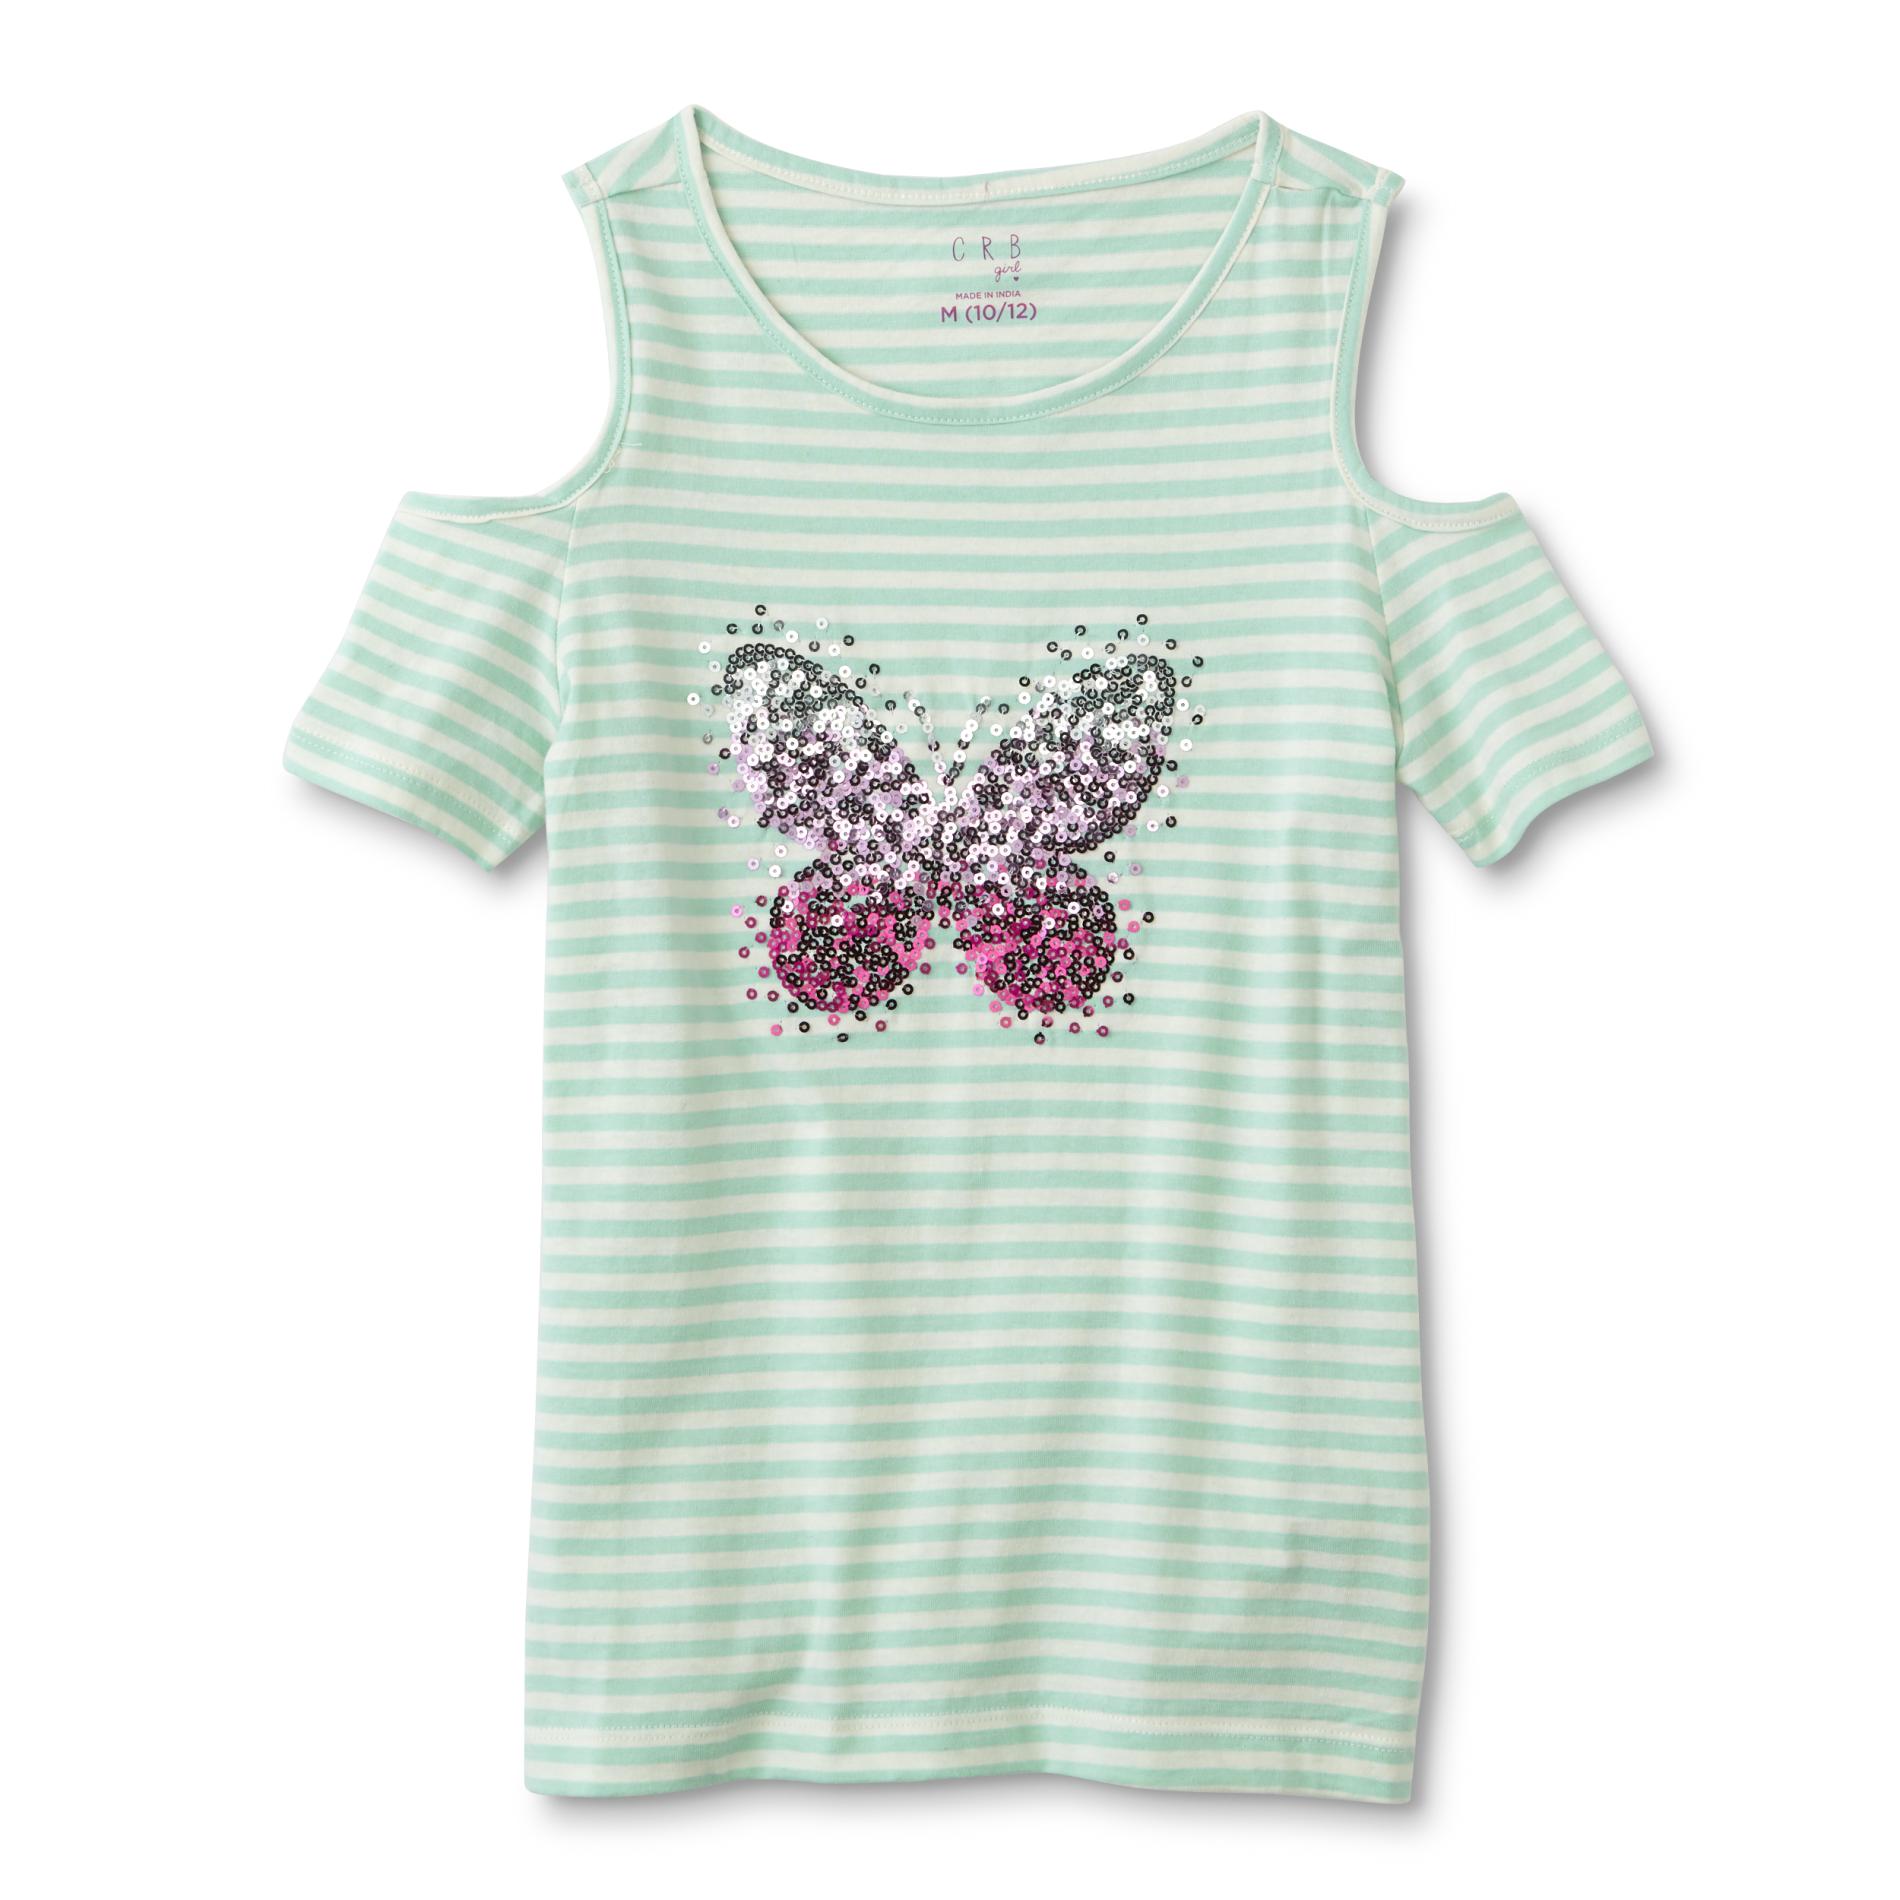 Canyon River Blues Girls' Cold Shoulder Top - Butterfly